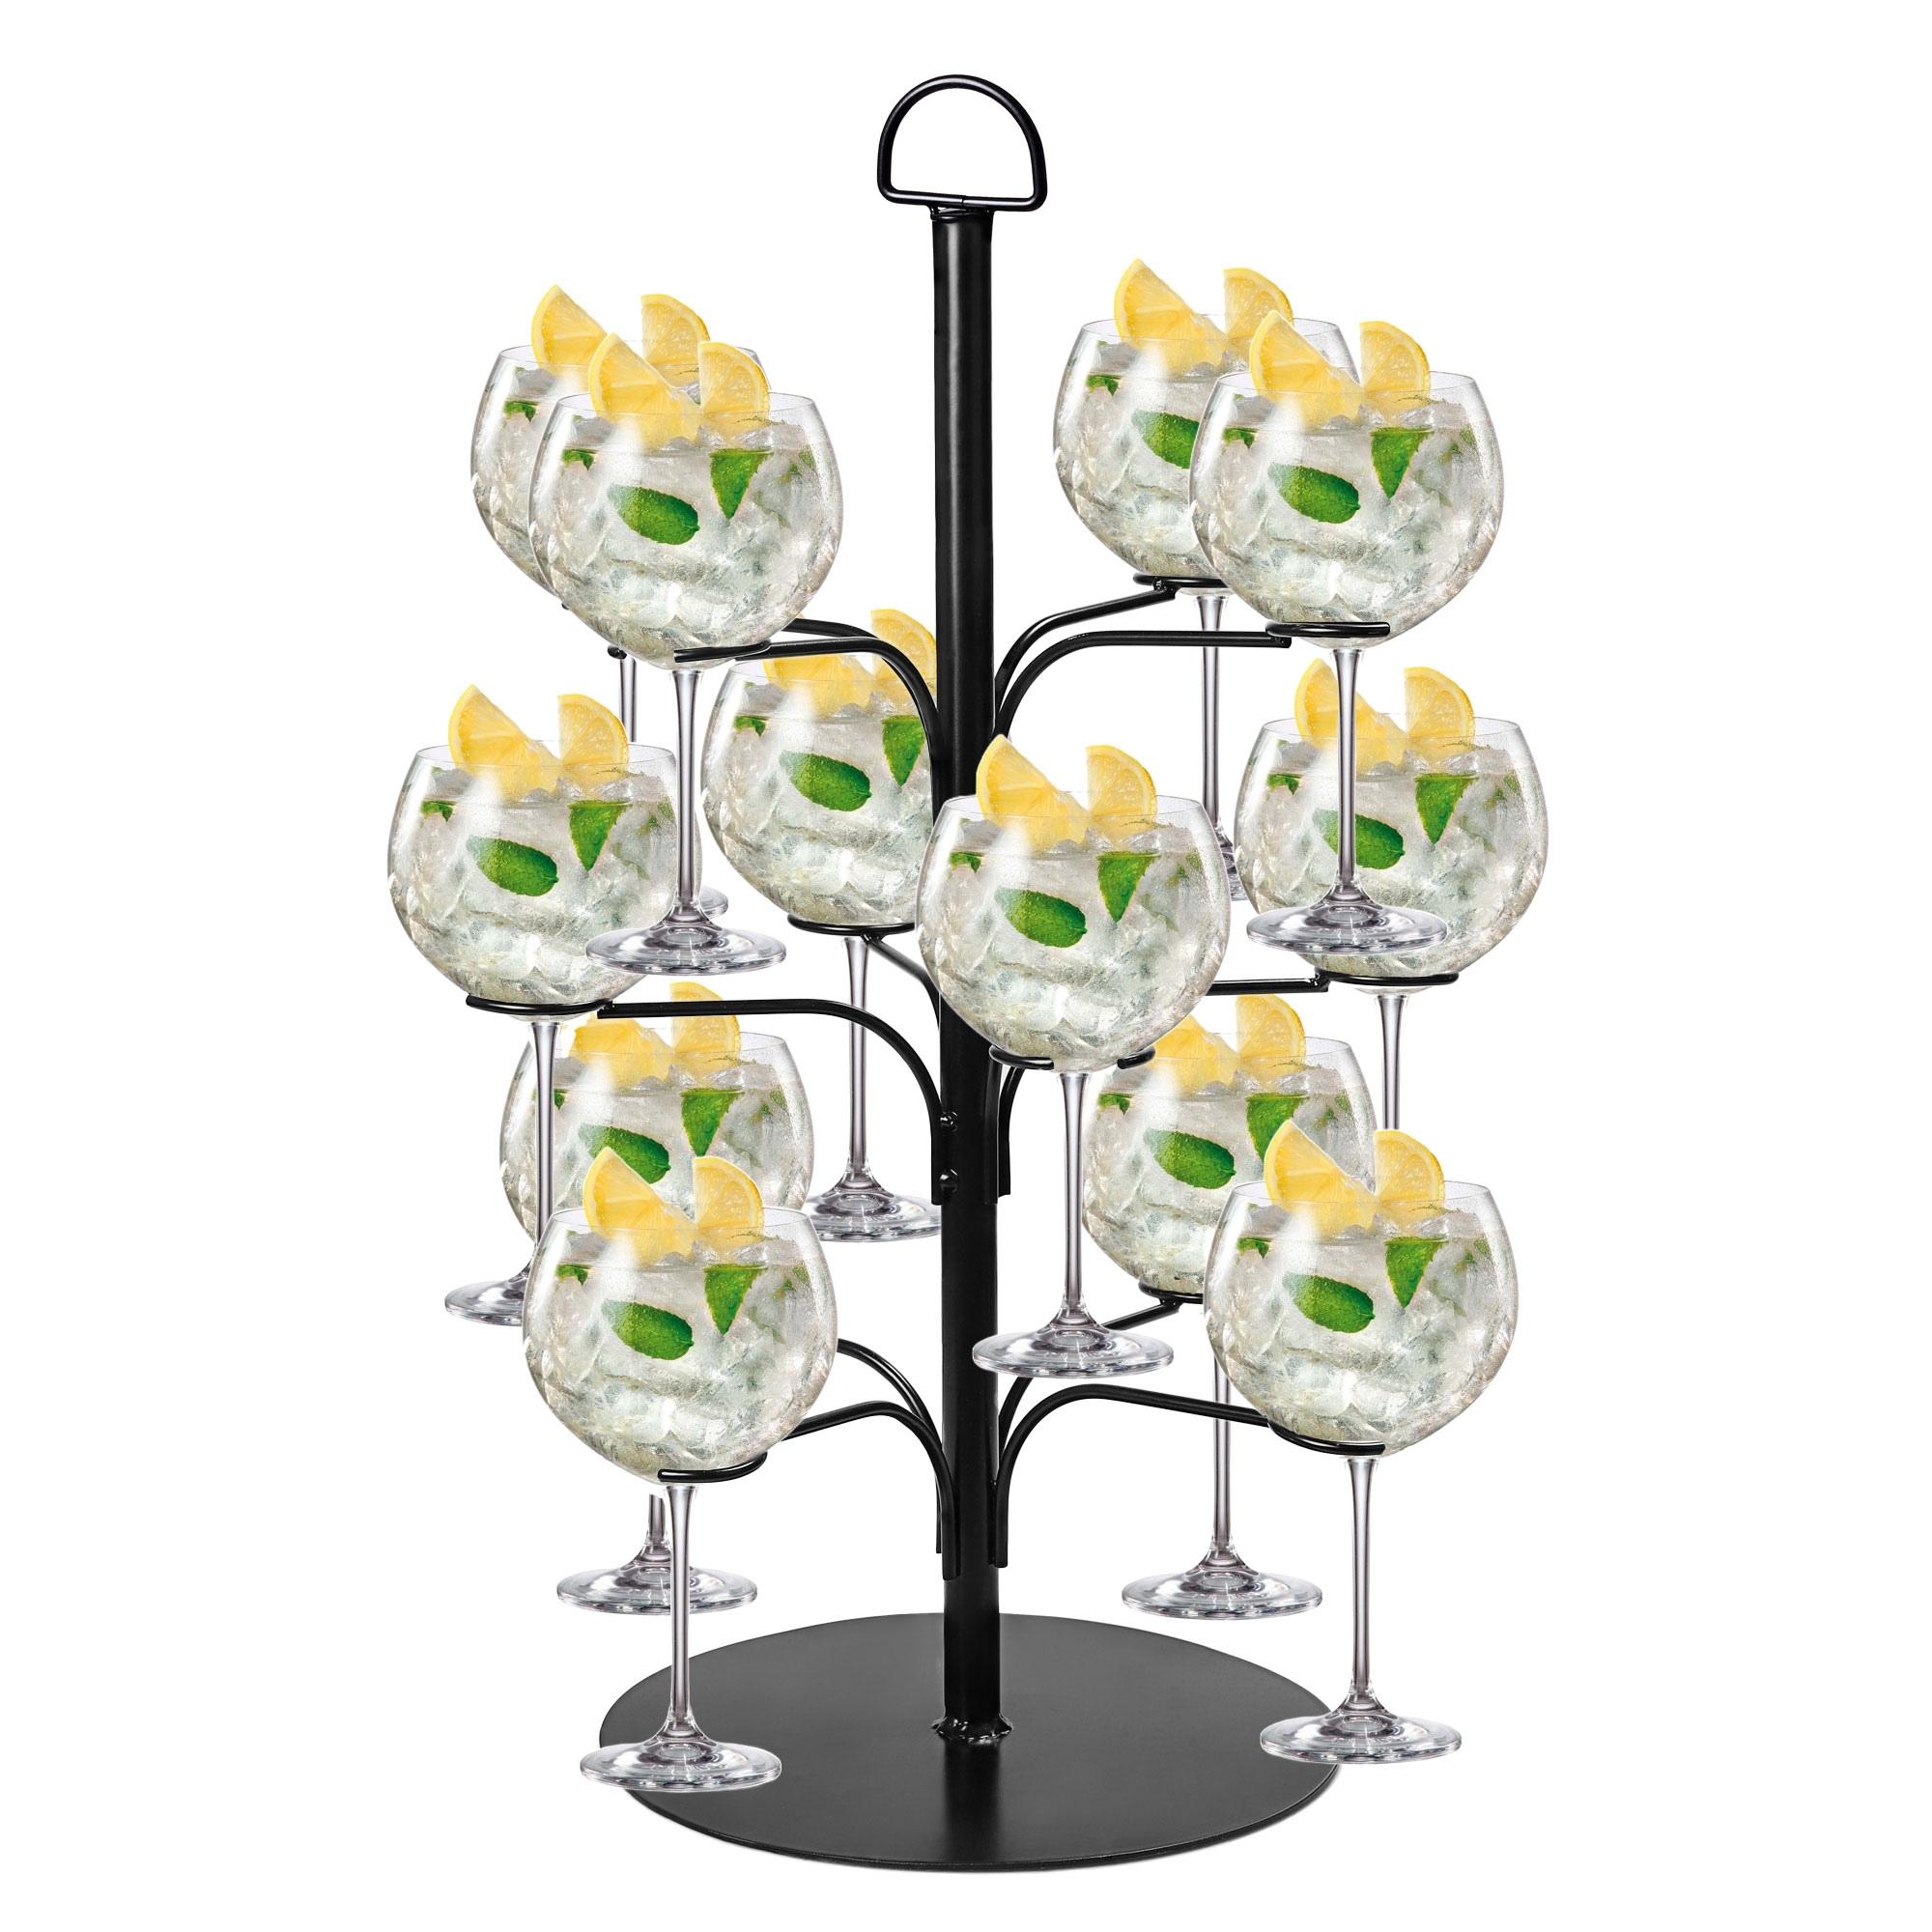 The Drinkstuff Cocktail Tree, The Drinkstuff Cocktail Tree is finally  here! Check out this video and head to our site to grab your own one now!, By Drinkstuff